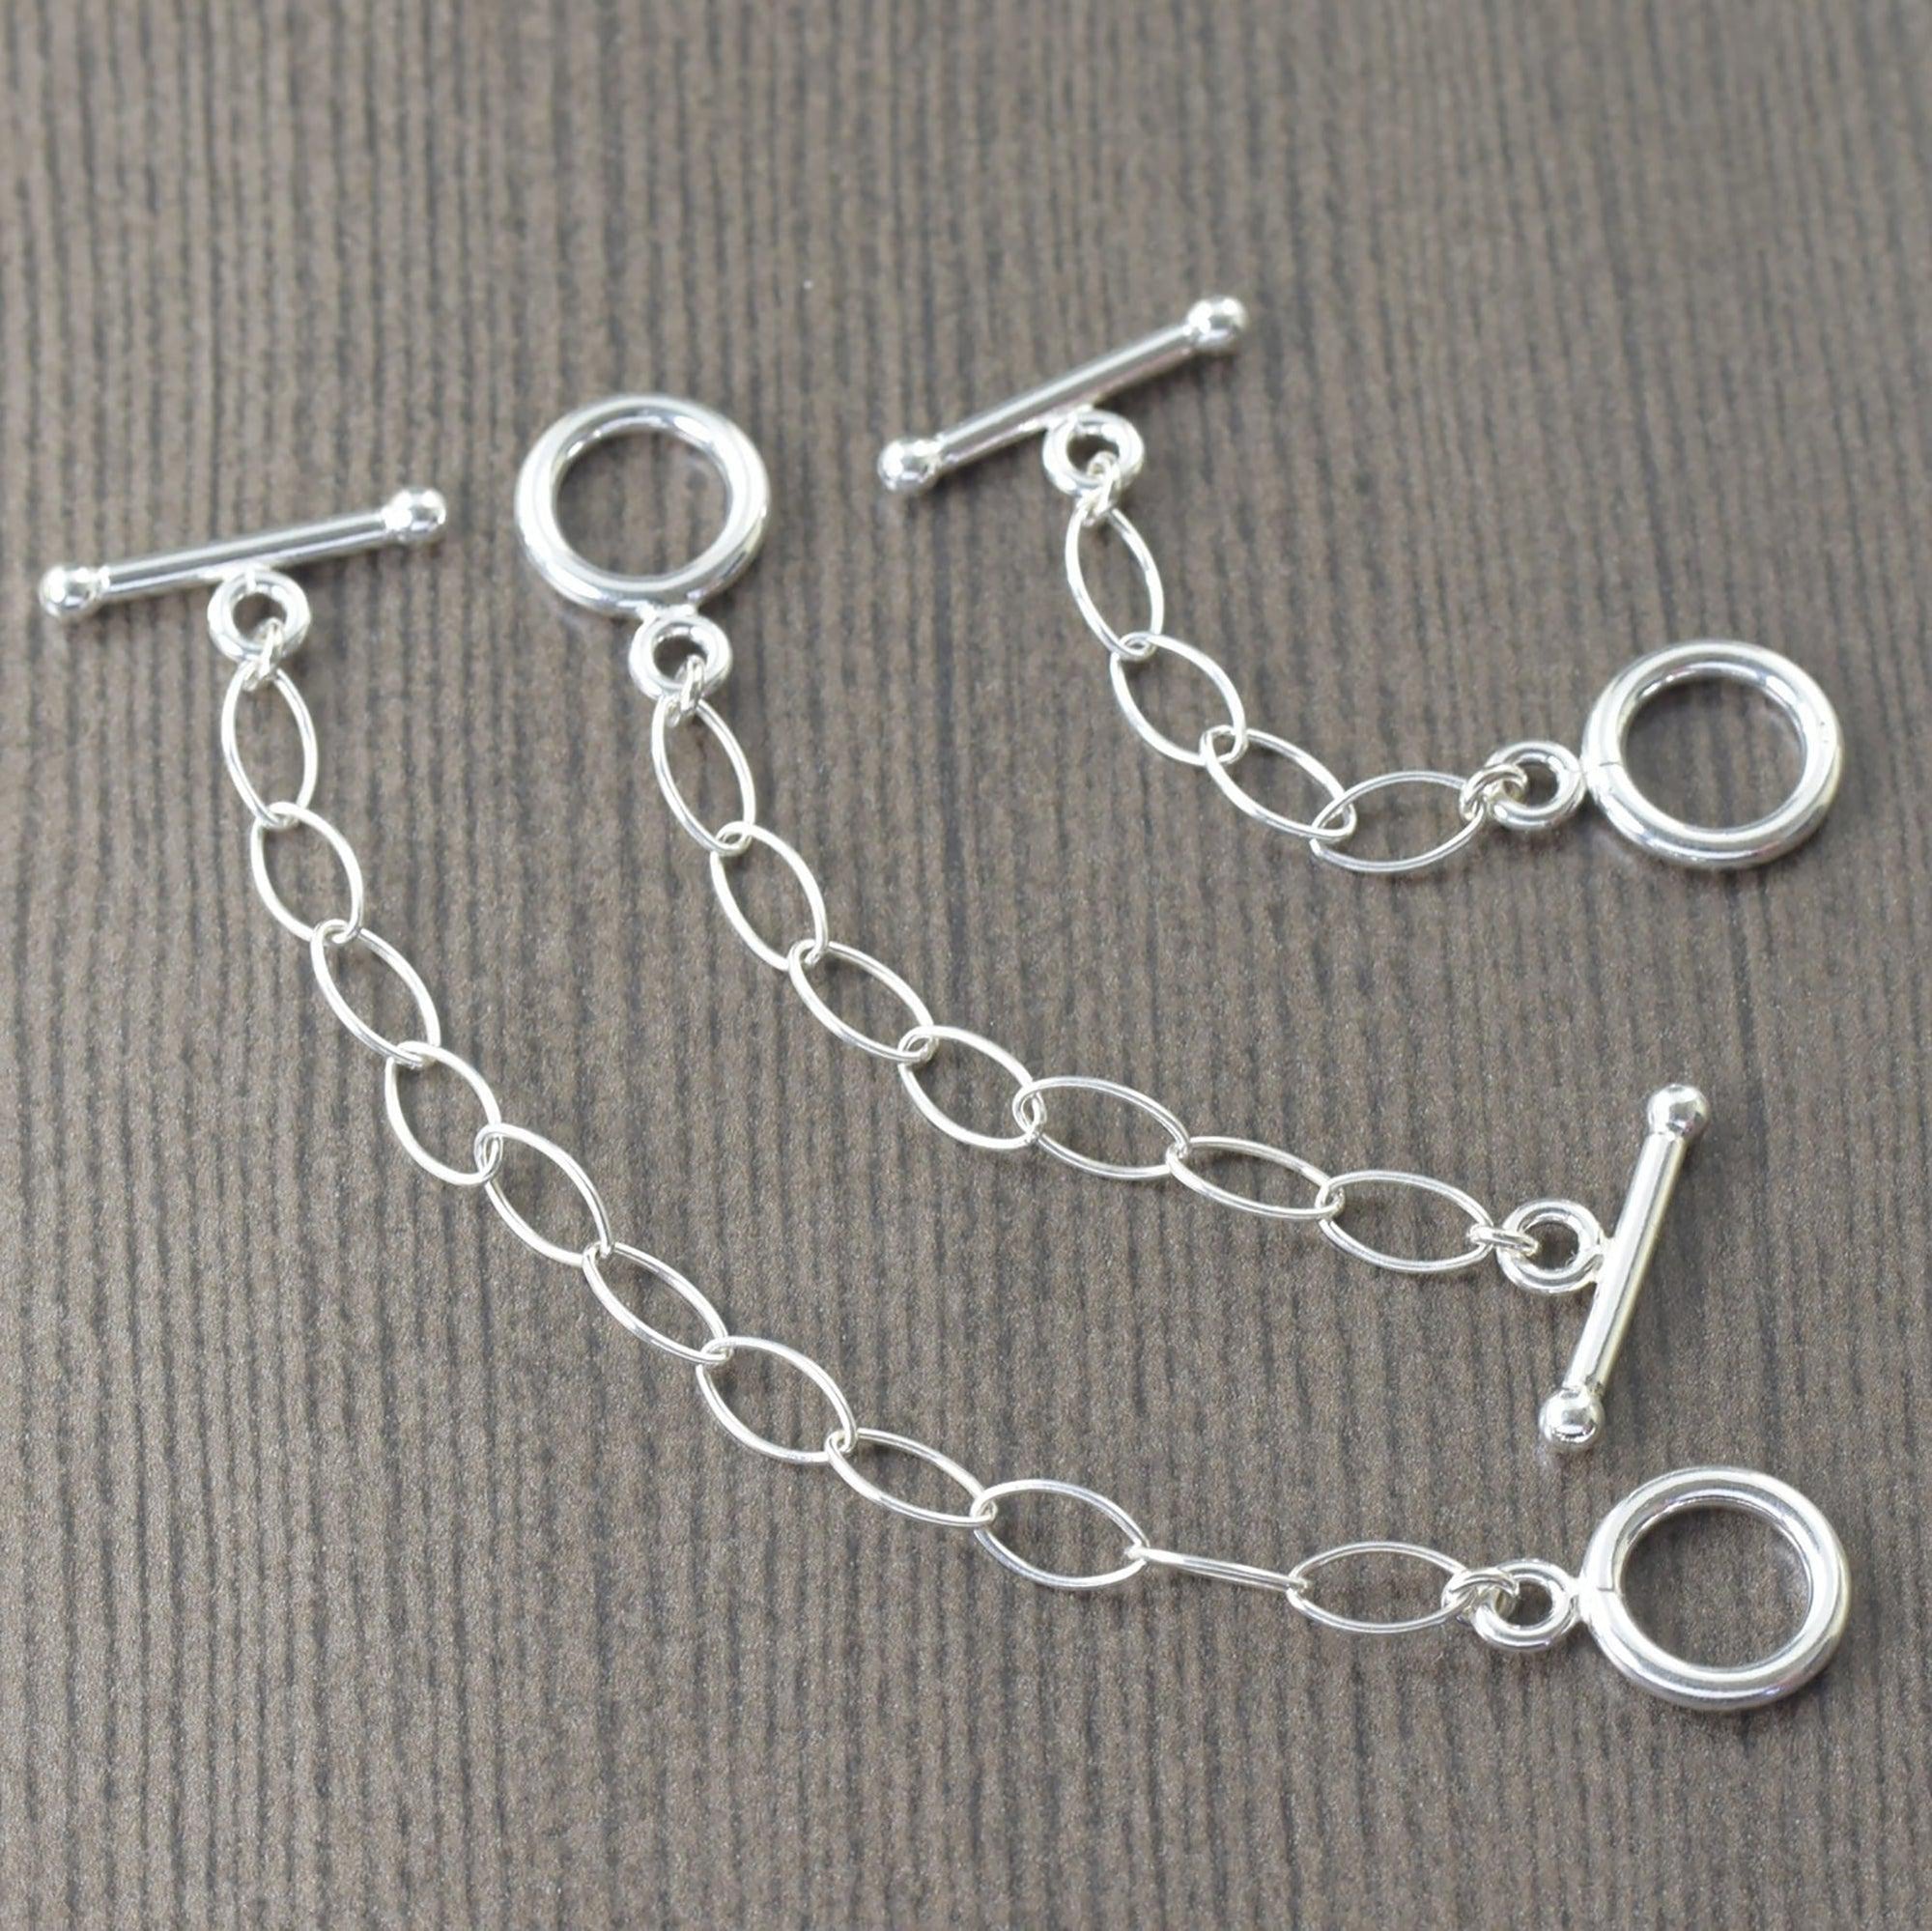 Sterling silver necklace extensions for toggle clasp, in 2-5